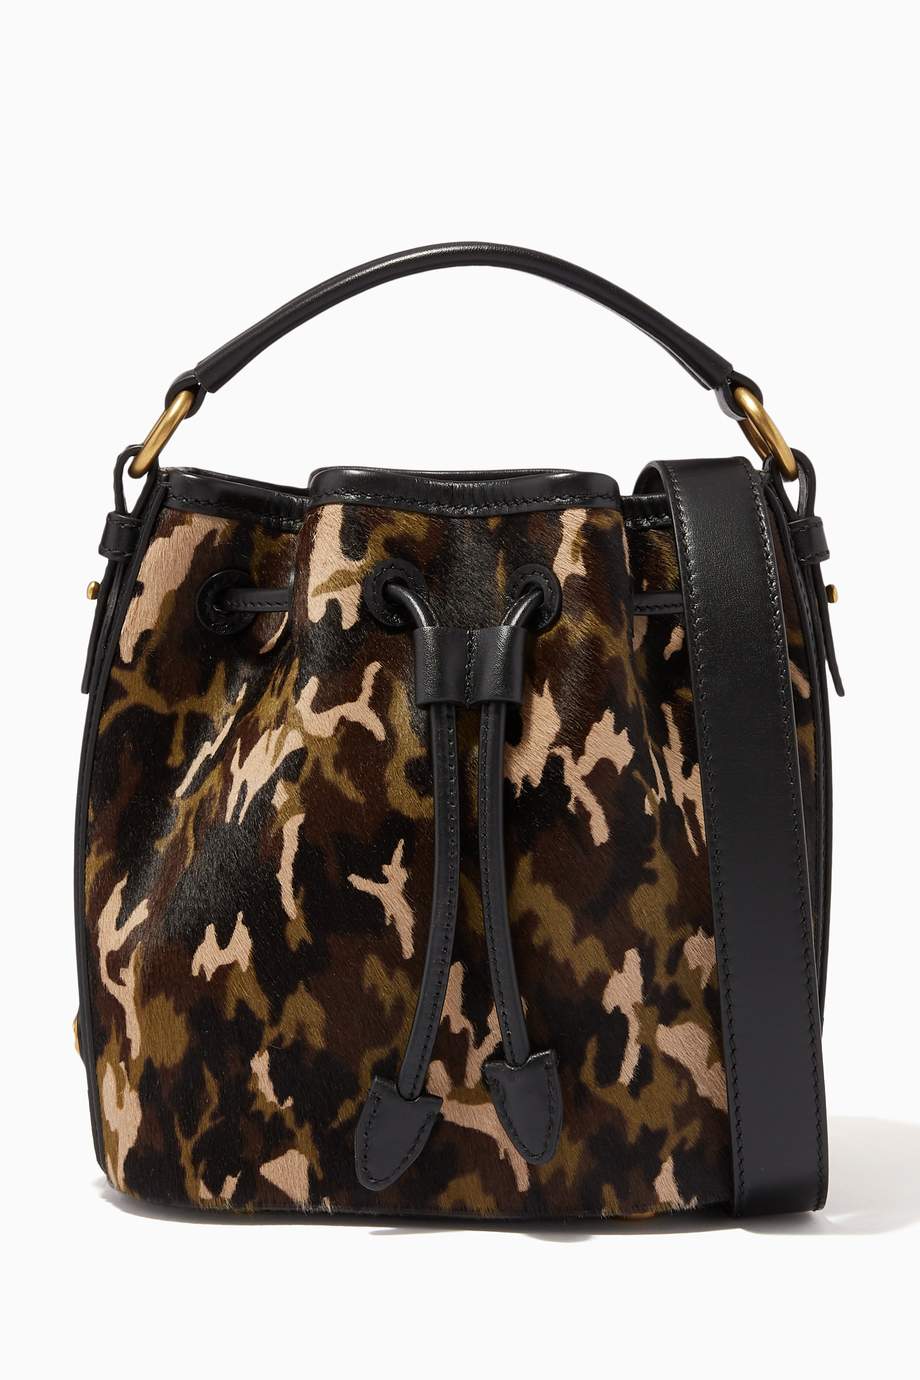 Shop Michael Kors Collection Green Small Carole Bucket Bag in Camouflage Calf Hair for Women | Ounass UAE